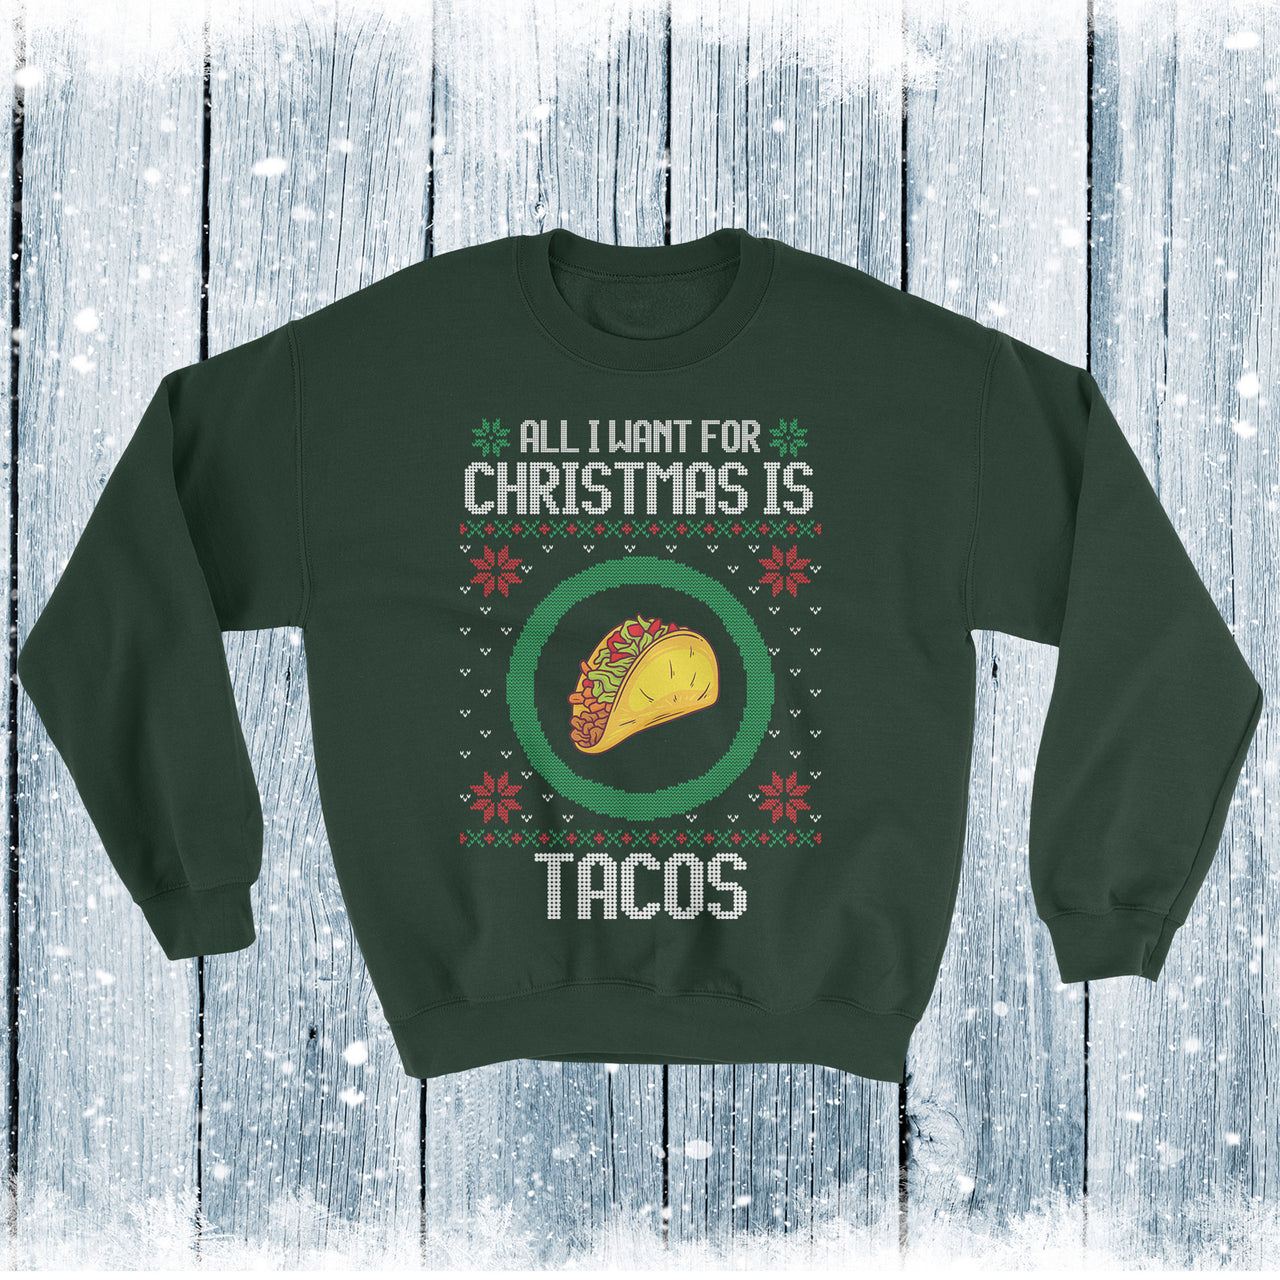 Christmas Sweater, All I Want For Christmas is Tacos , Ugly Christmas Sweater, Ugly Christmas Swaeter, Holiday Sweater, Festive Taco Sweater